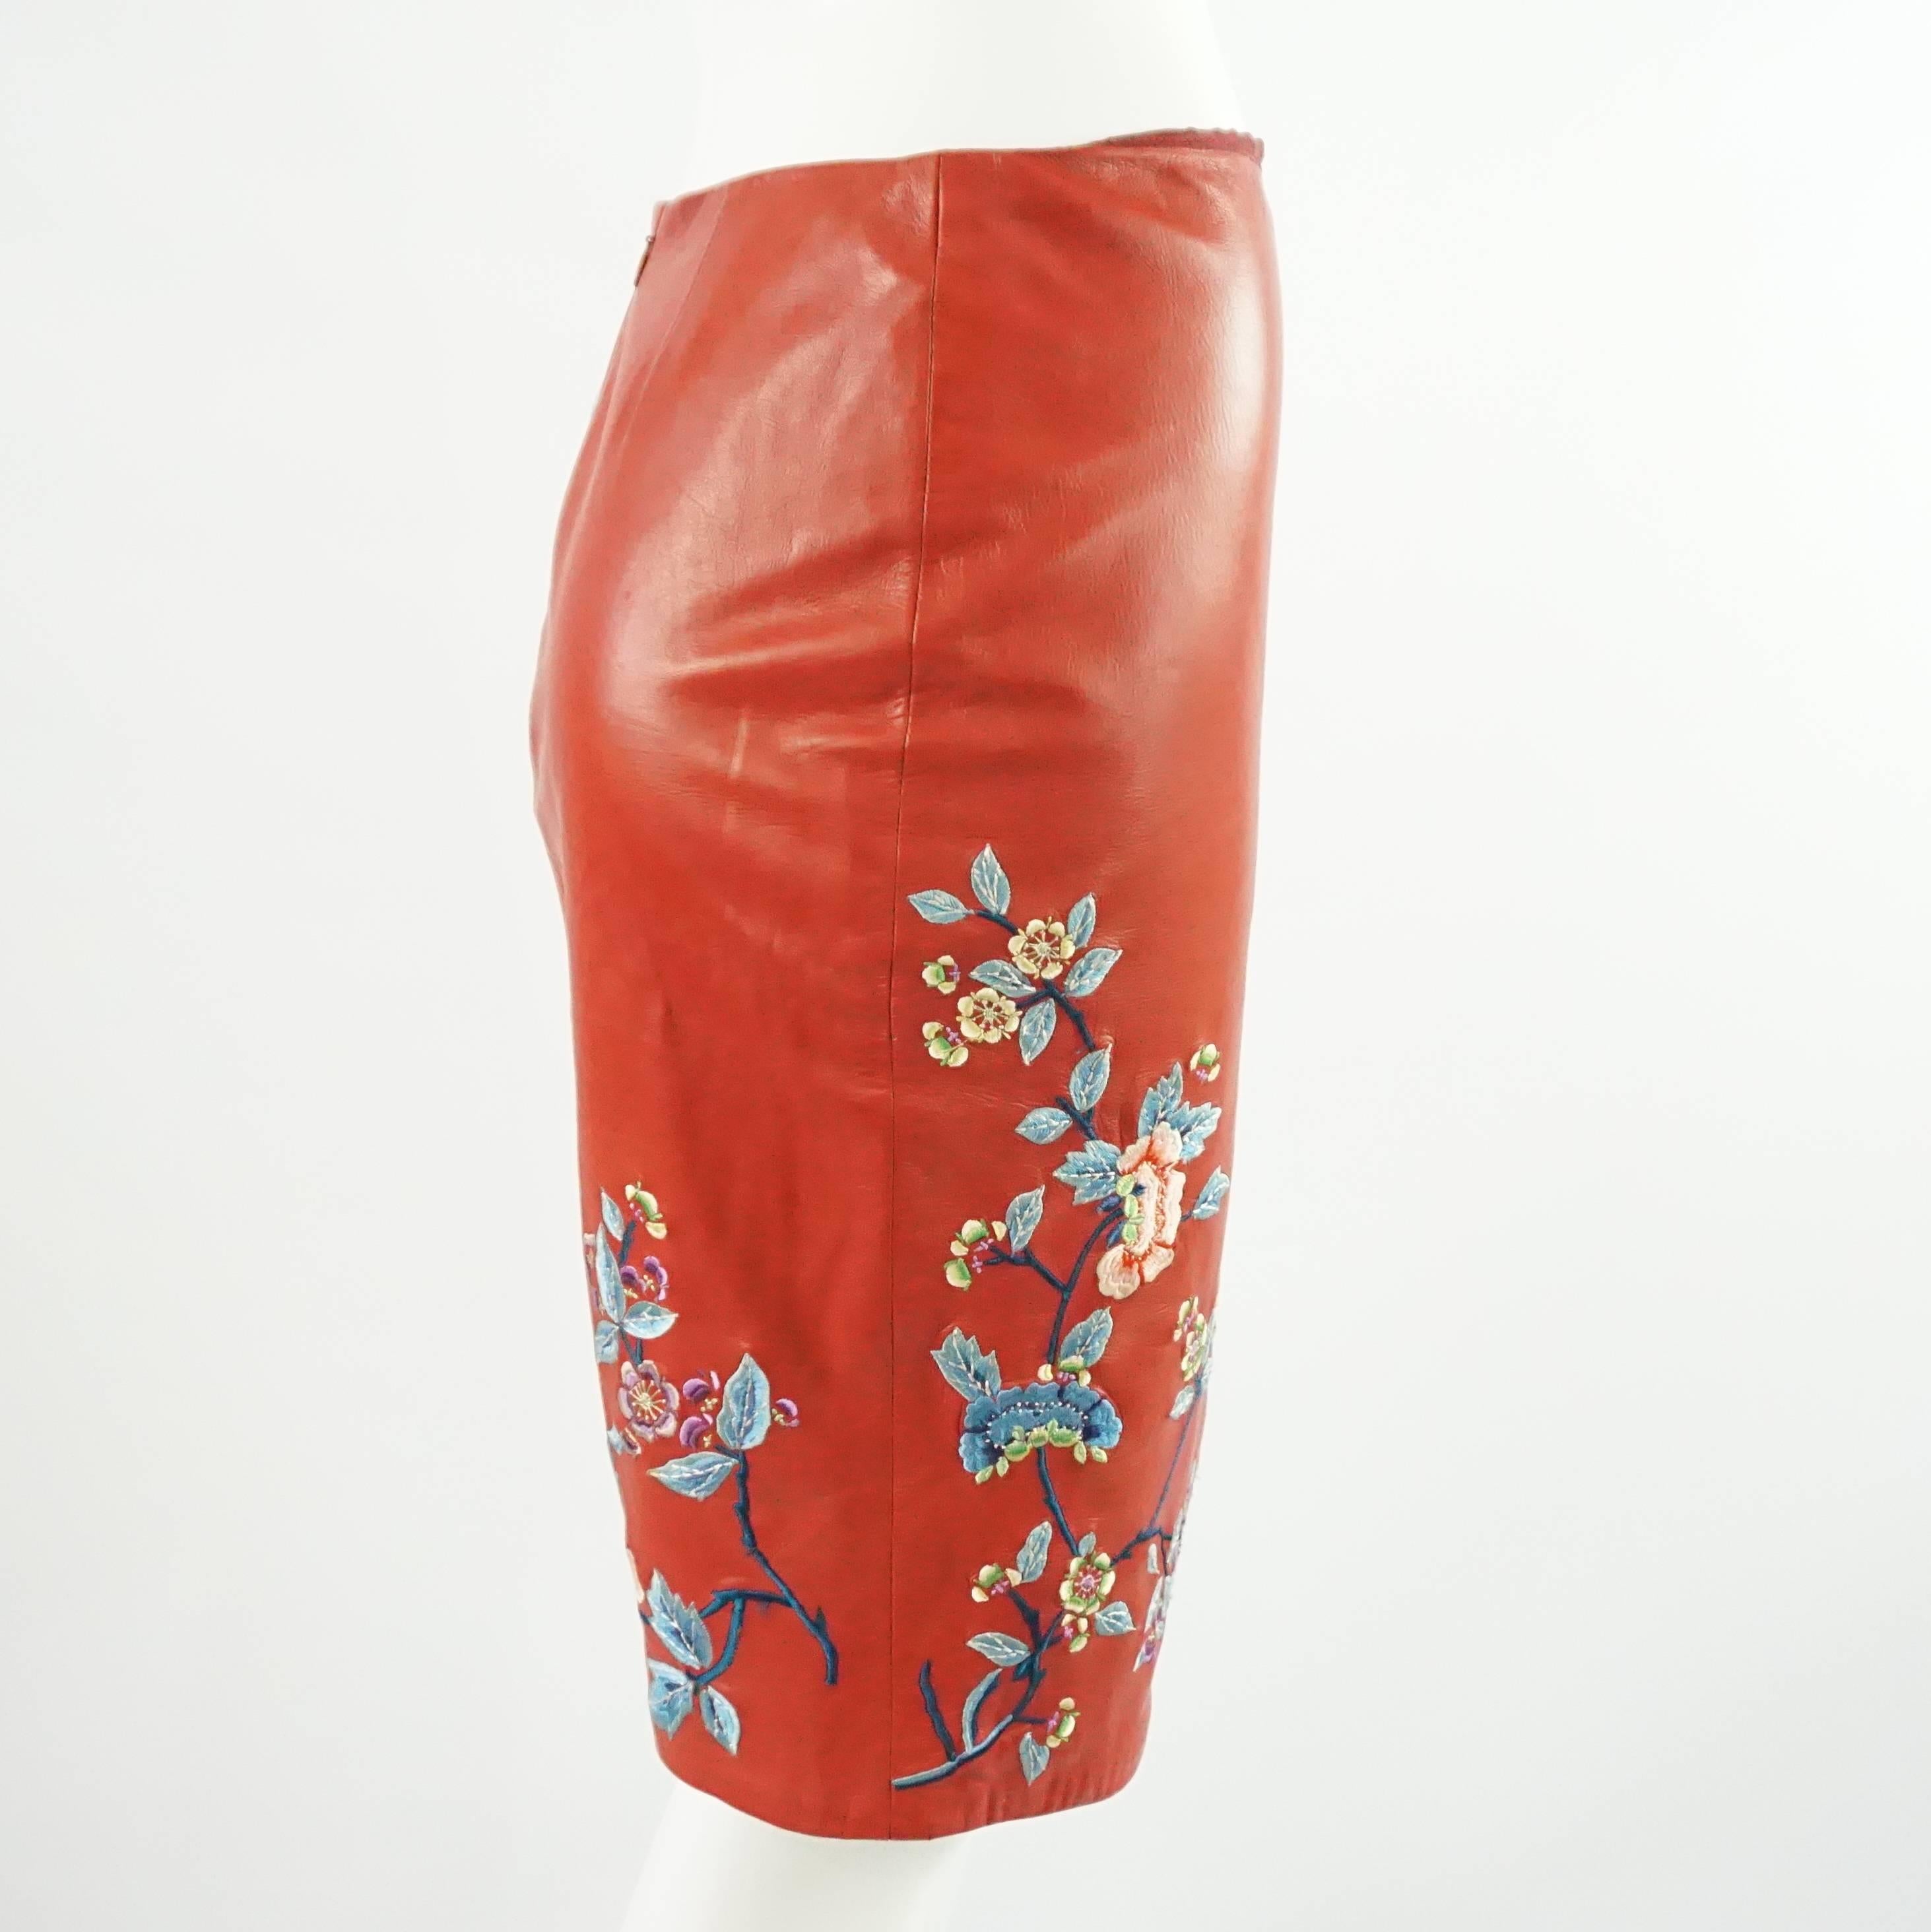 This Ralph Lauren skirt is red leather and has embroidery. The embroidery is a print print with multiple colors such as blue, yellow, and pink. There is a side slit. This skirt is in very good condition with some markings.

Measurements
Waist: